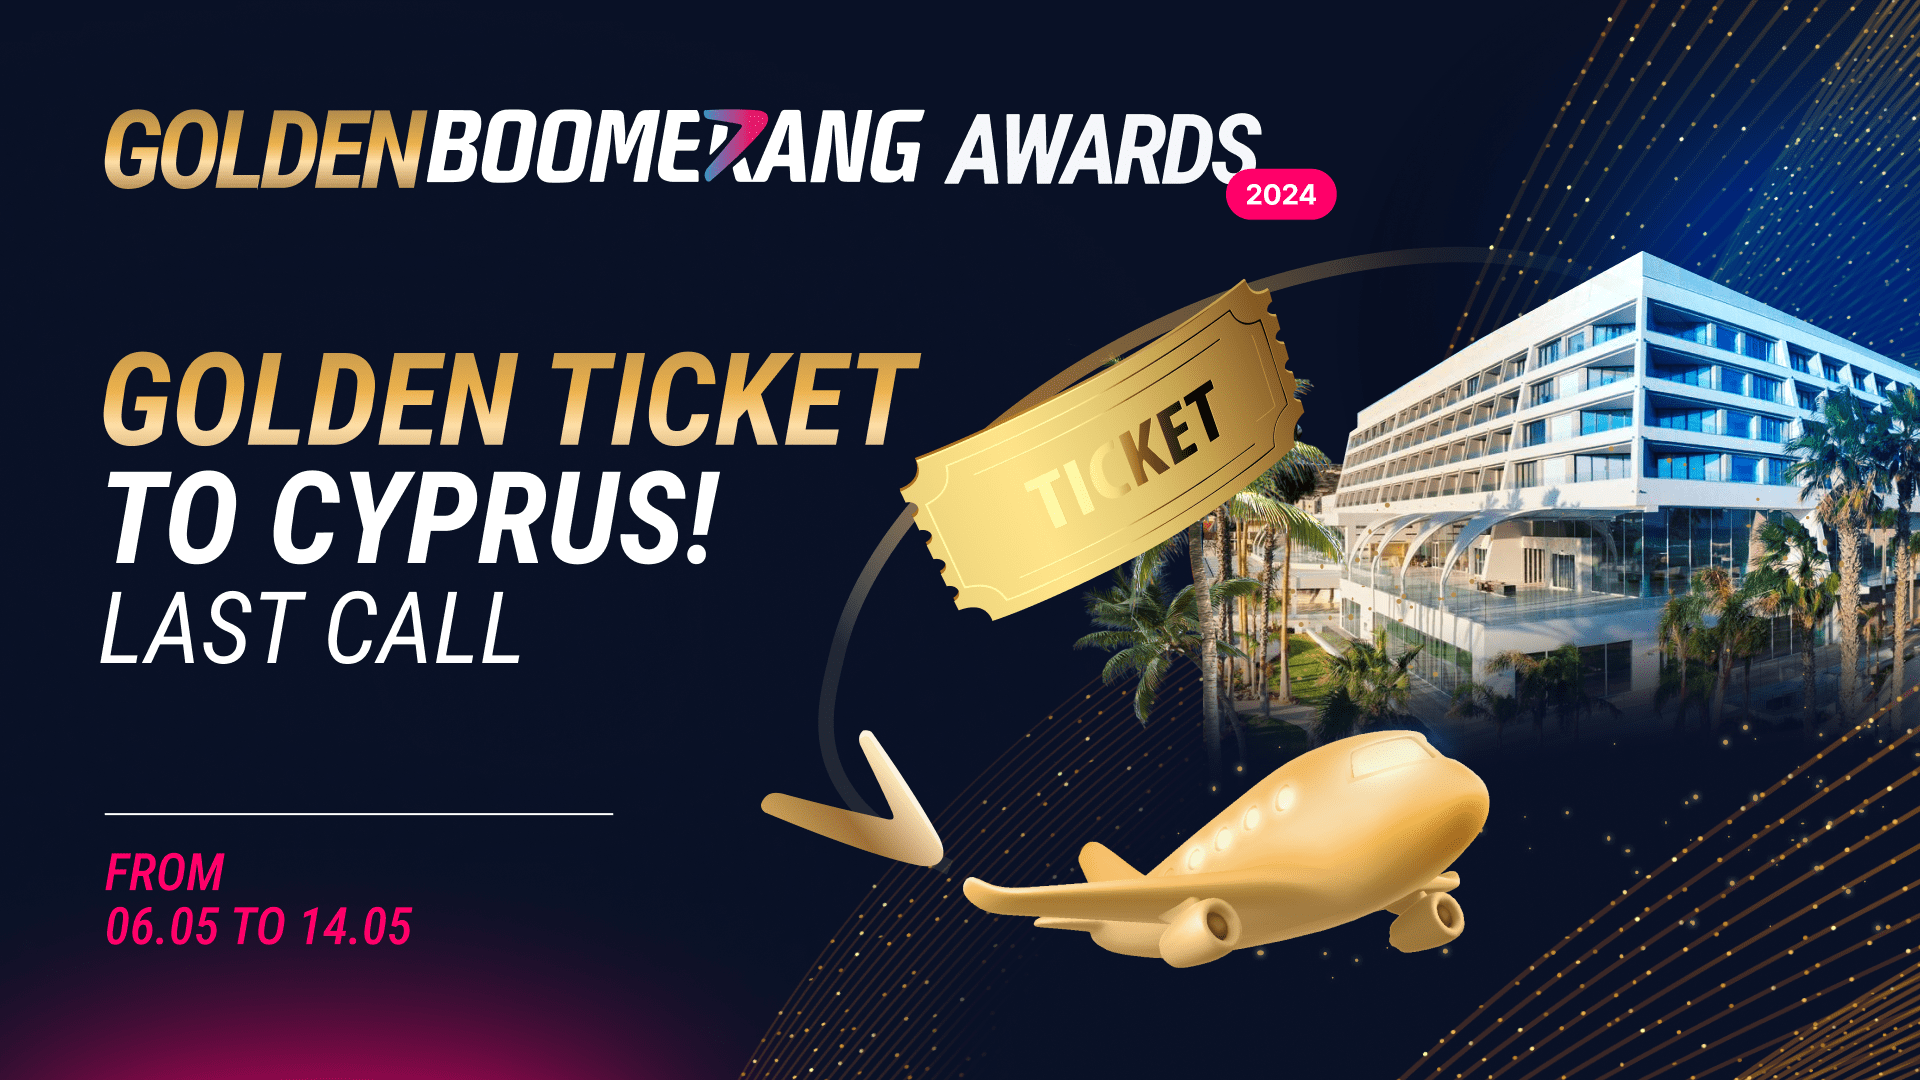 Golden Boomerang Awards Last Call: Win Your Golden Ticket at the Award Ceremony in Cyprus